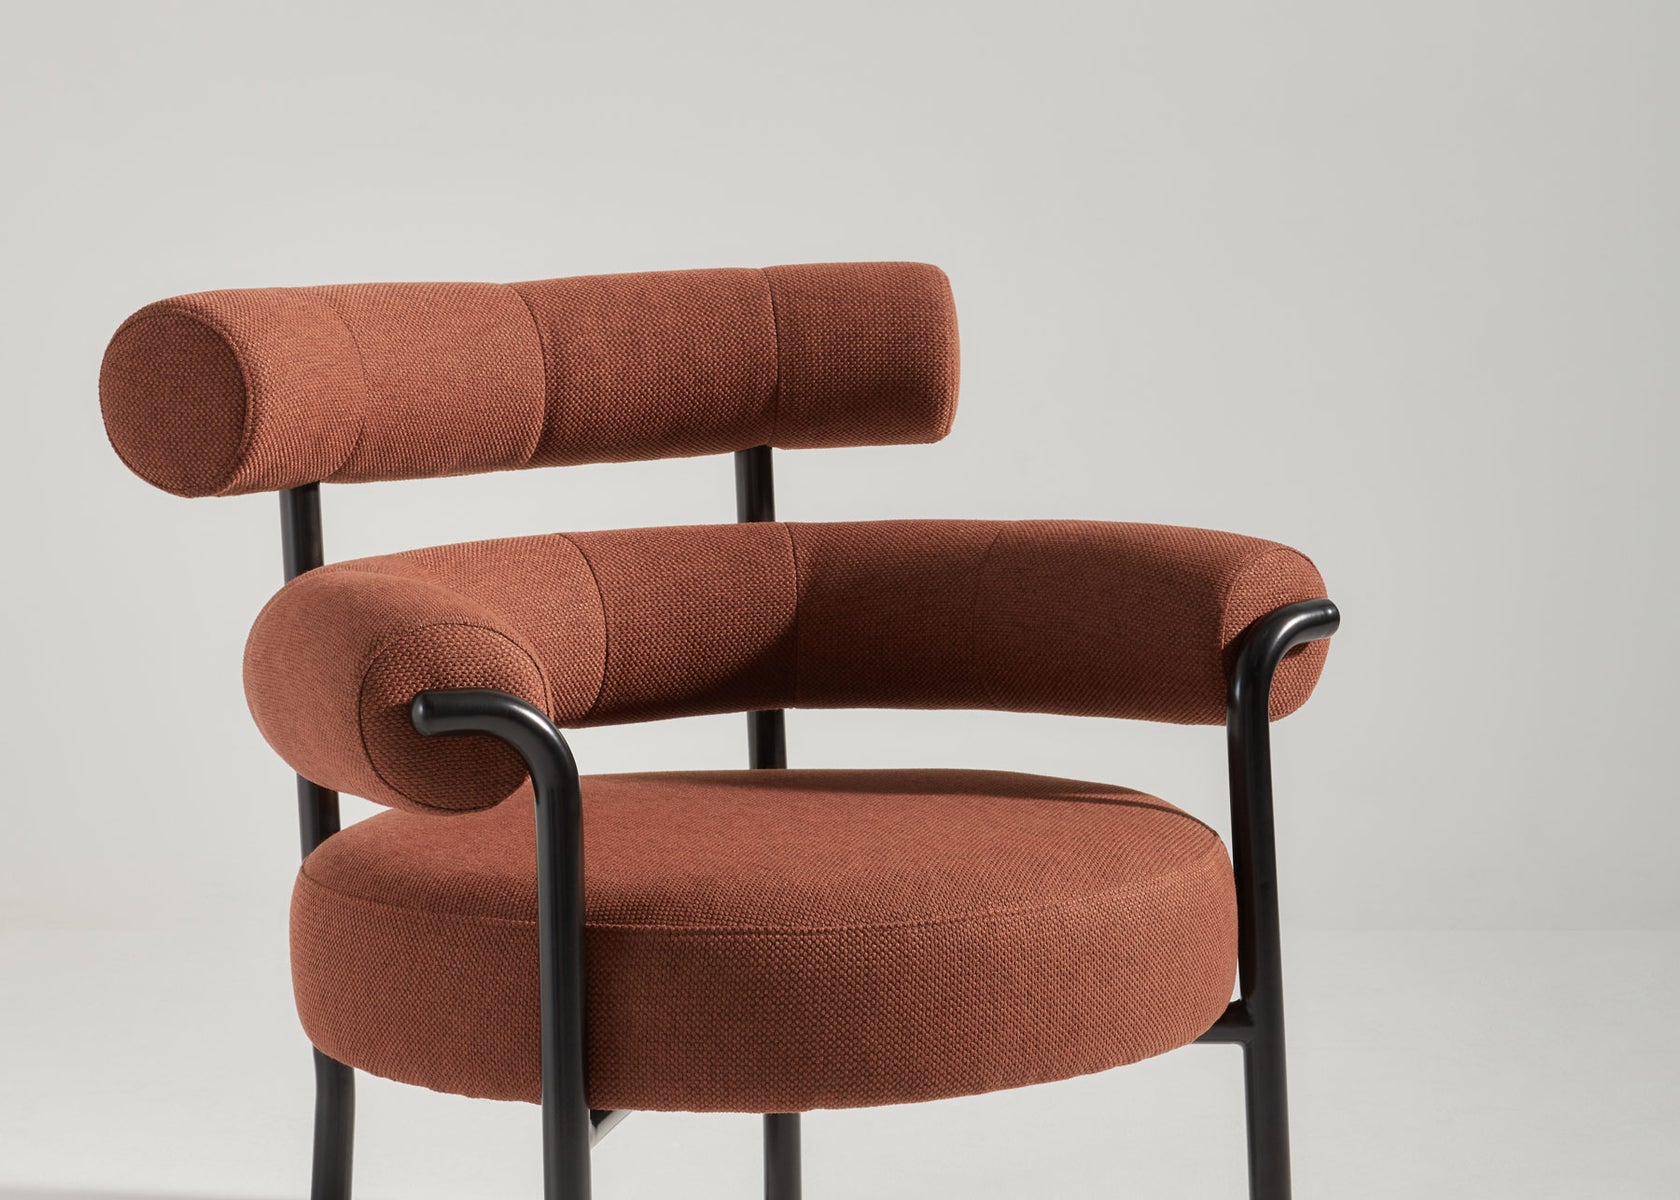 Olio Armchair by Christina Bricknell and Gibson Karlo | Round Upholstered Chair Steel Frame | DesignByThem | Gallery